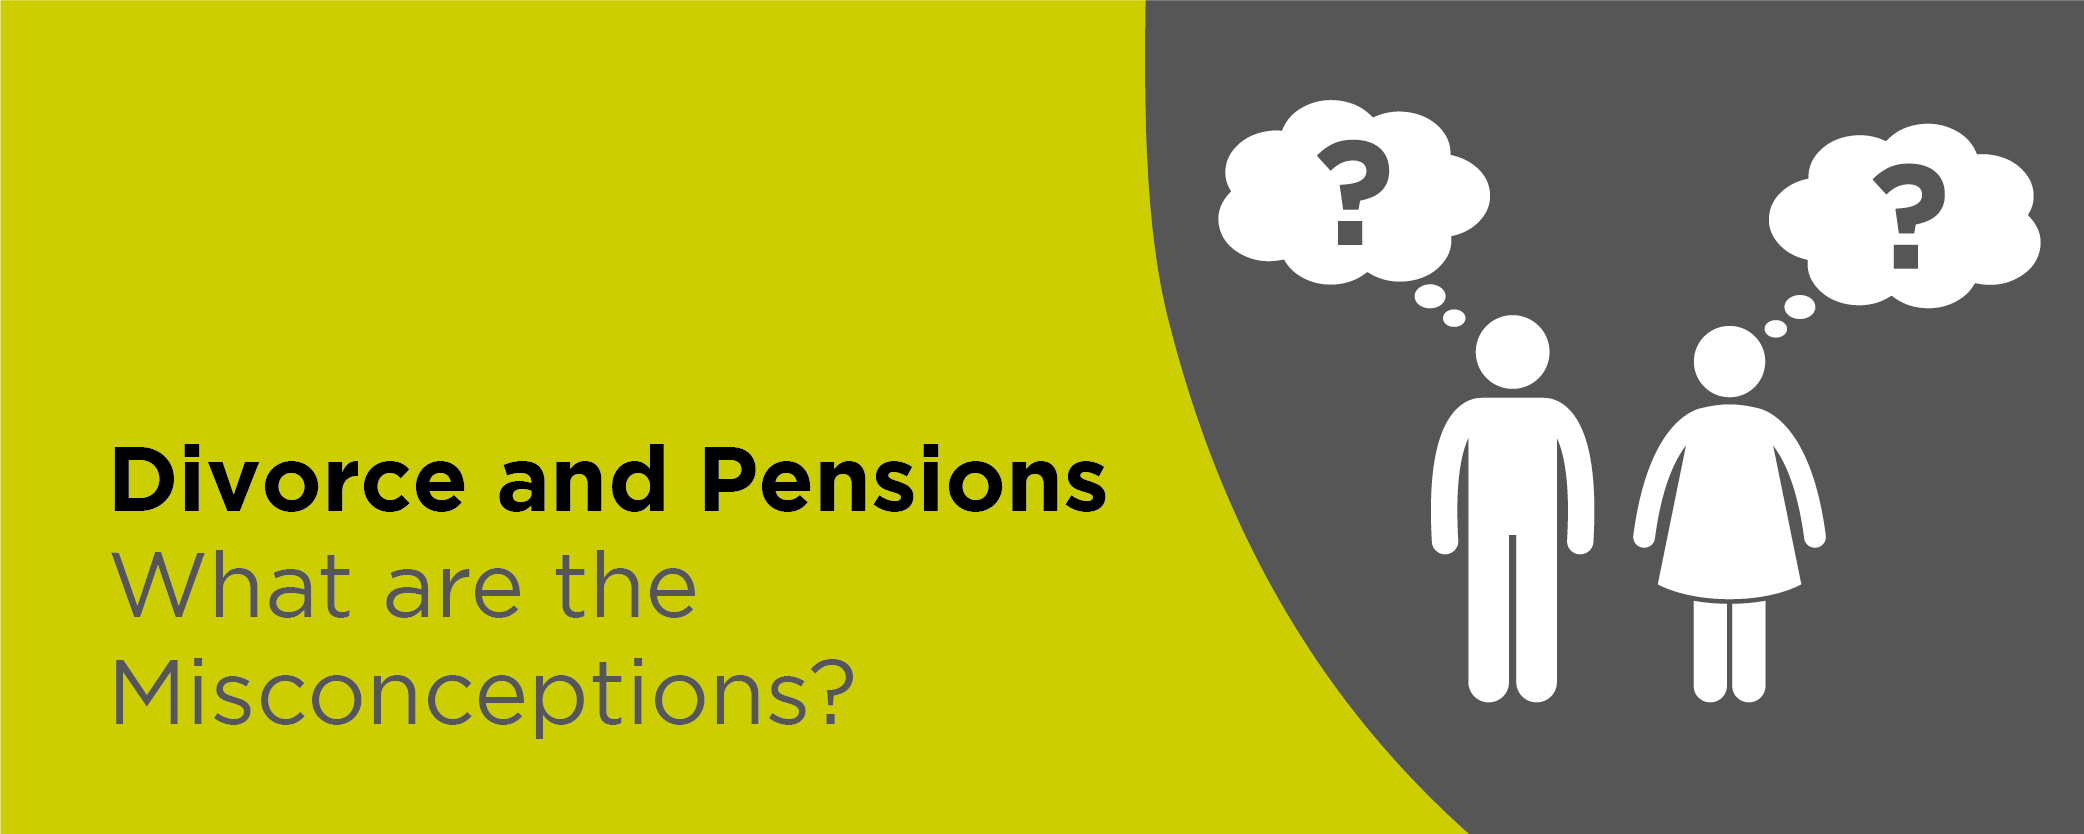 Divorce and Pensions: What are the Misconceptions?